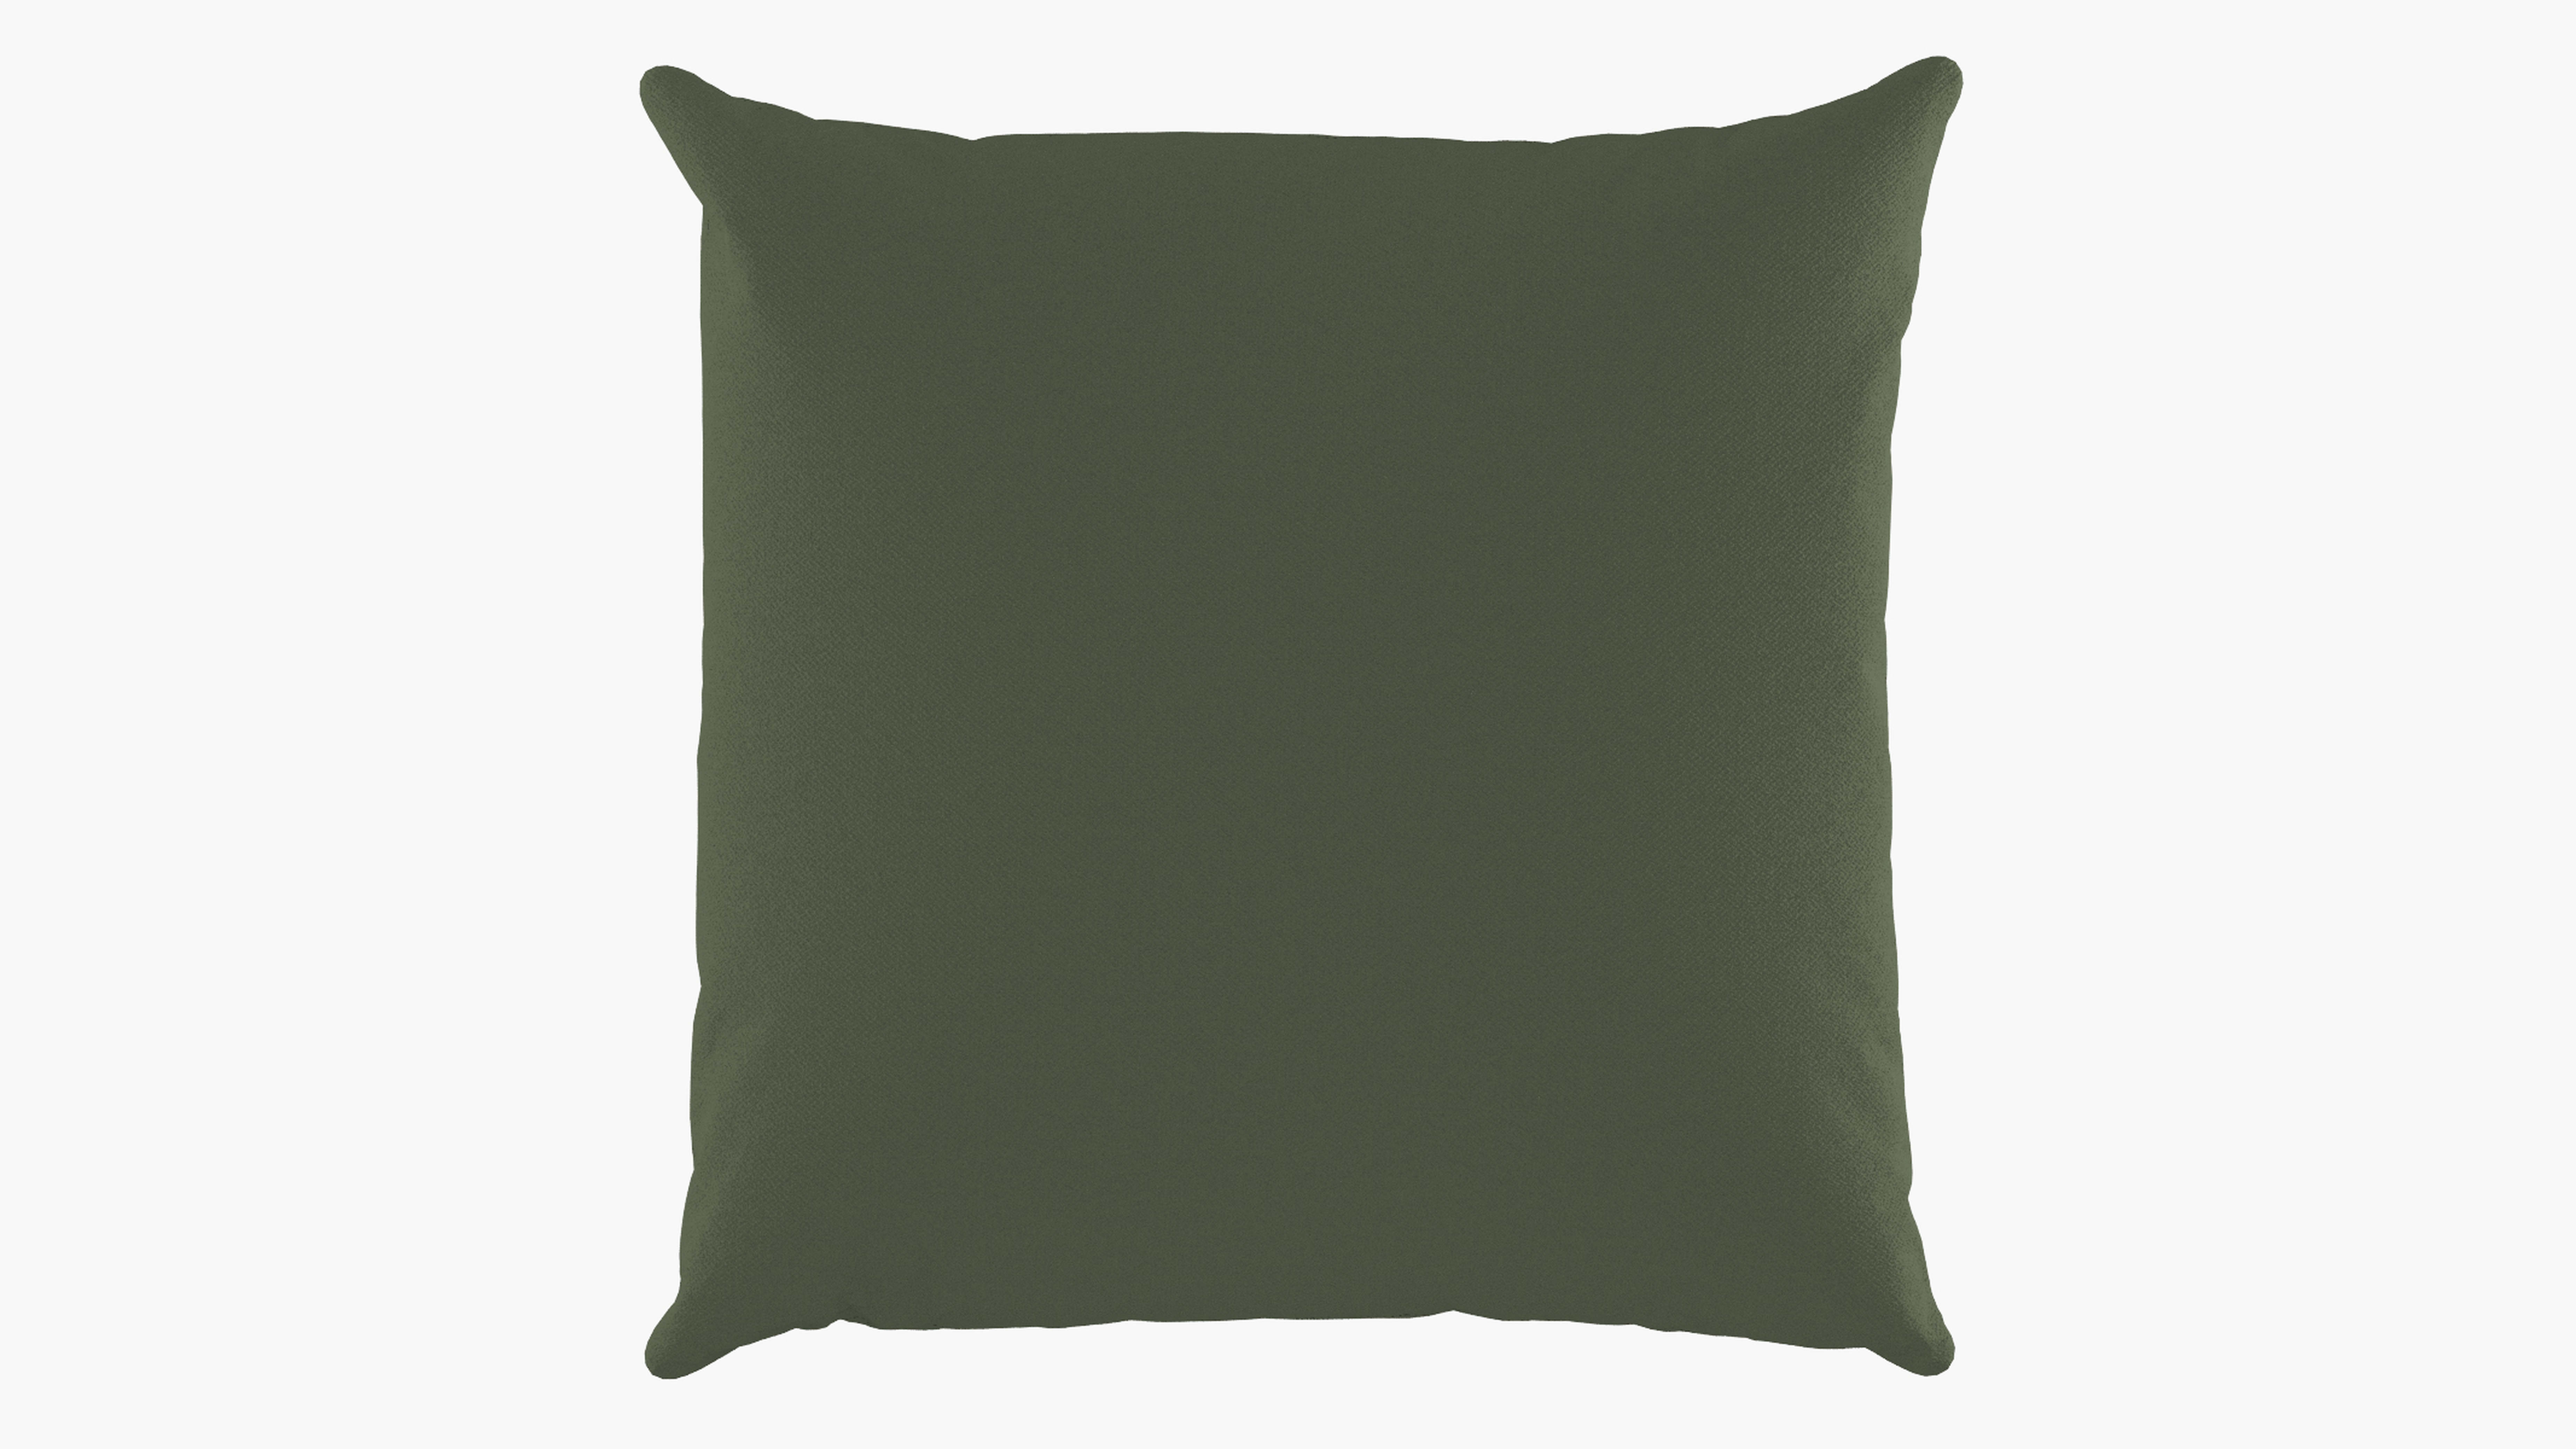 Outdoor 20" Throw Pillow, Olive, 20" x 20" - The Inside